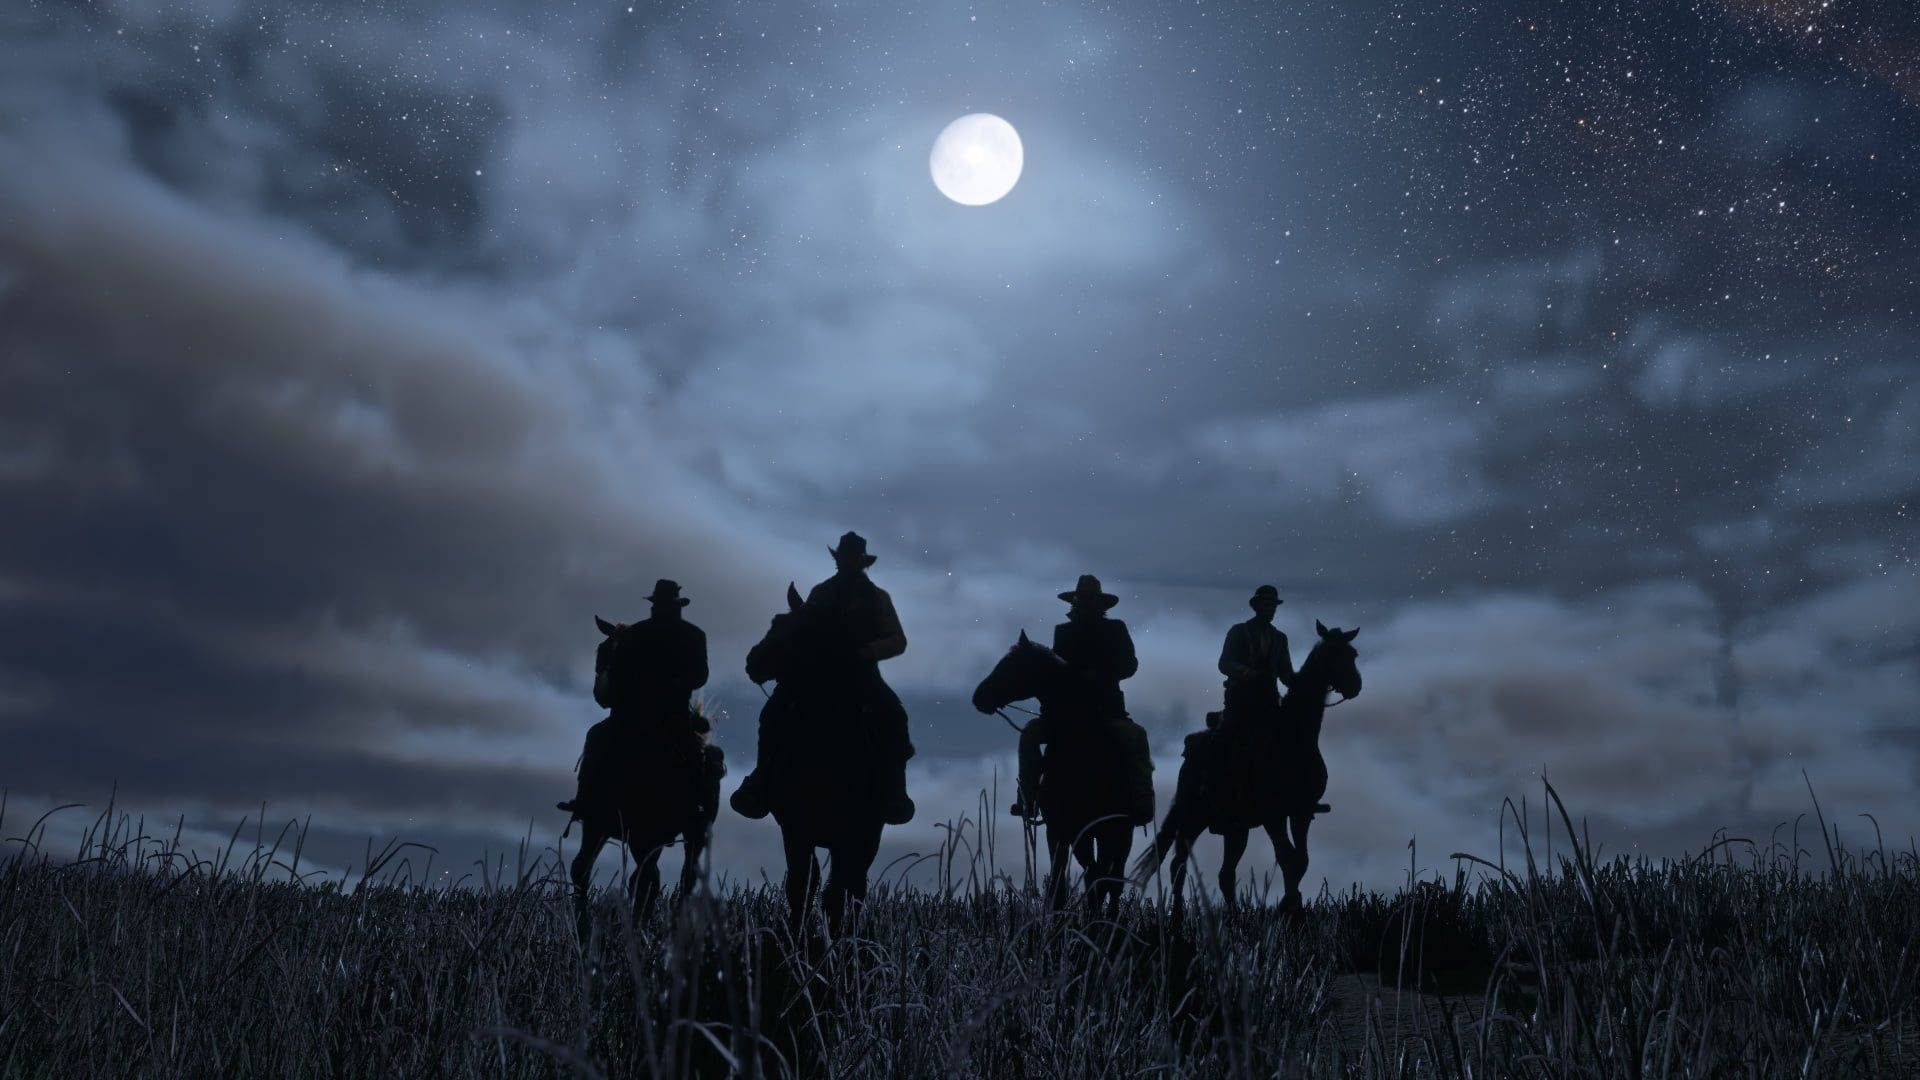 Horse Red Dead Redemption 2 Cowboys At Night Wallpaper